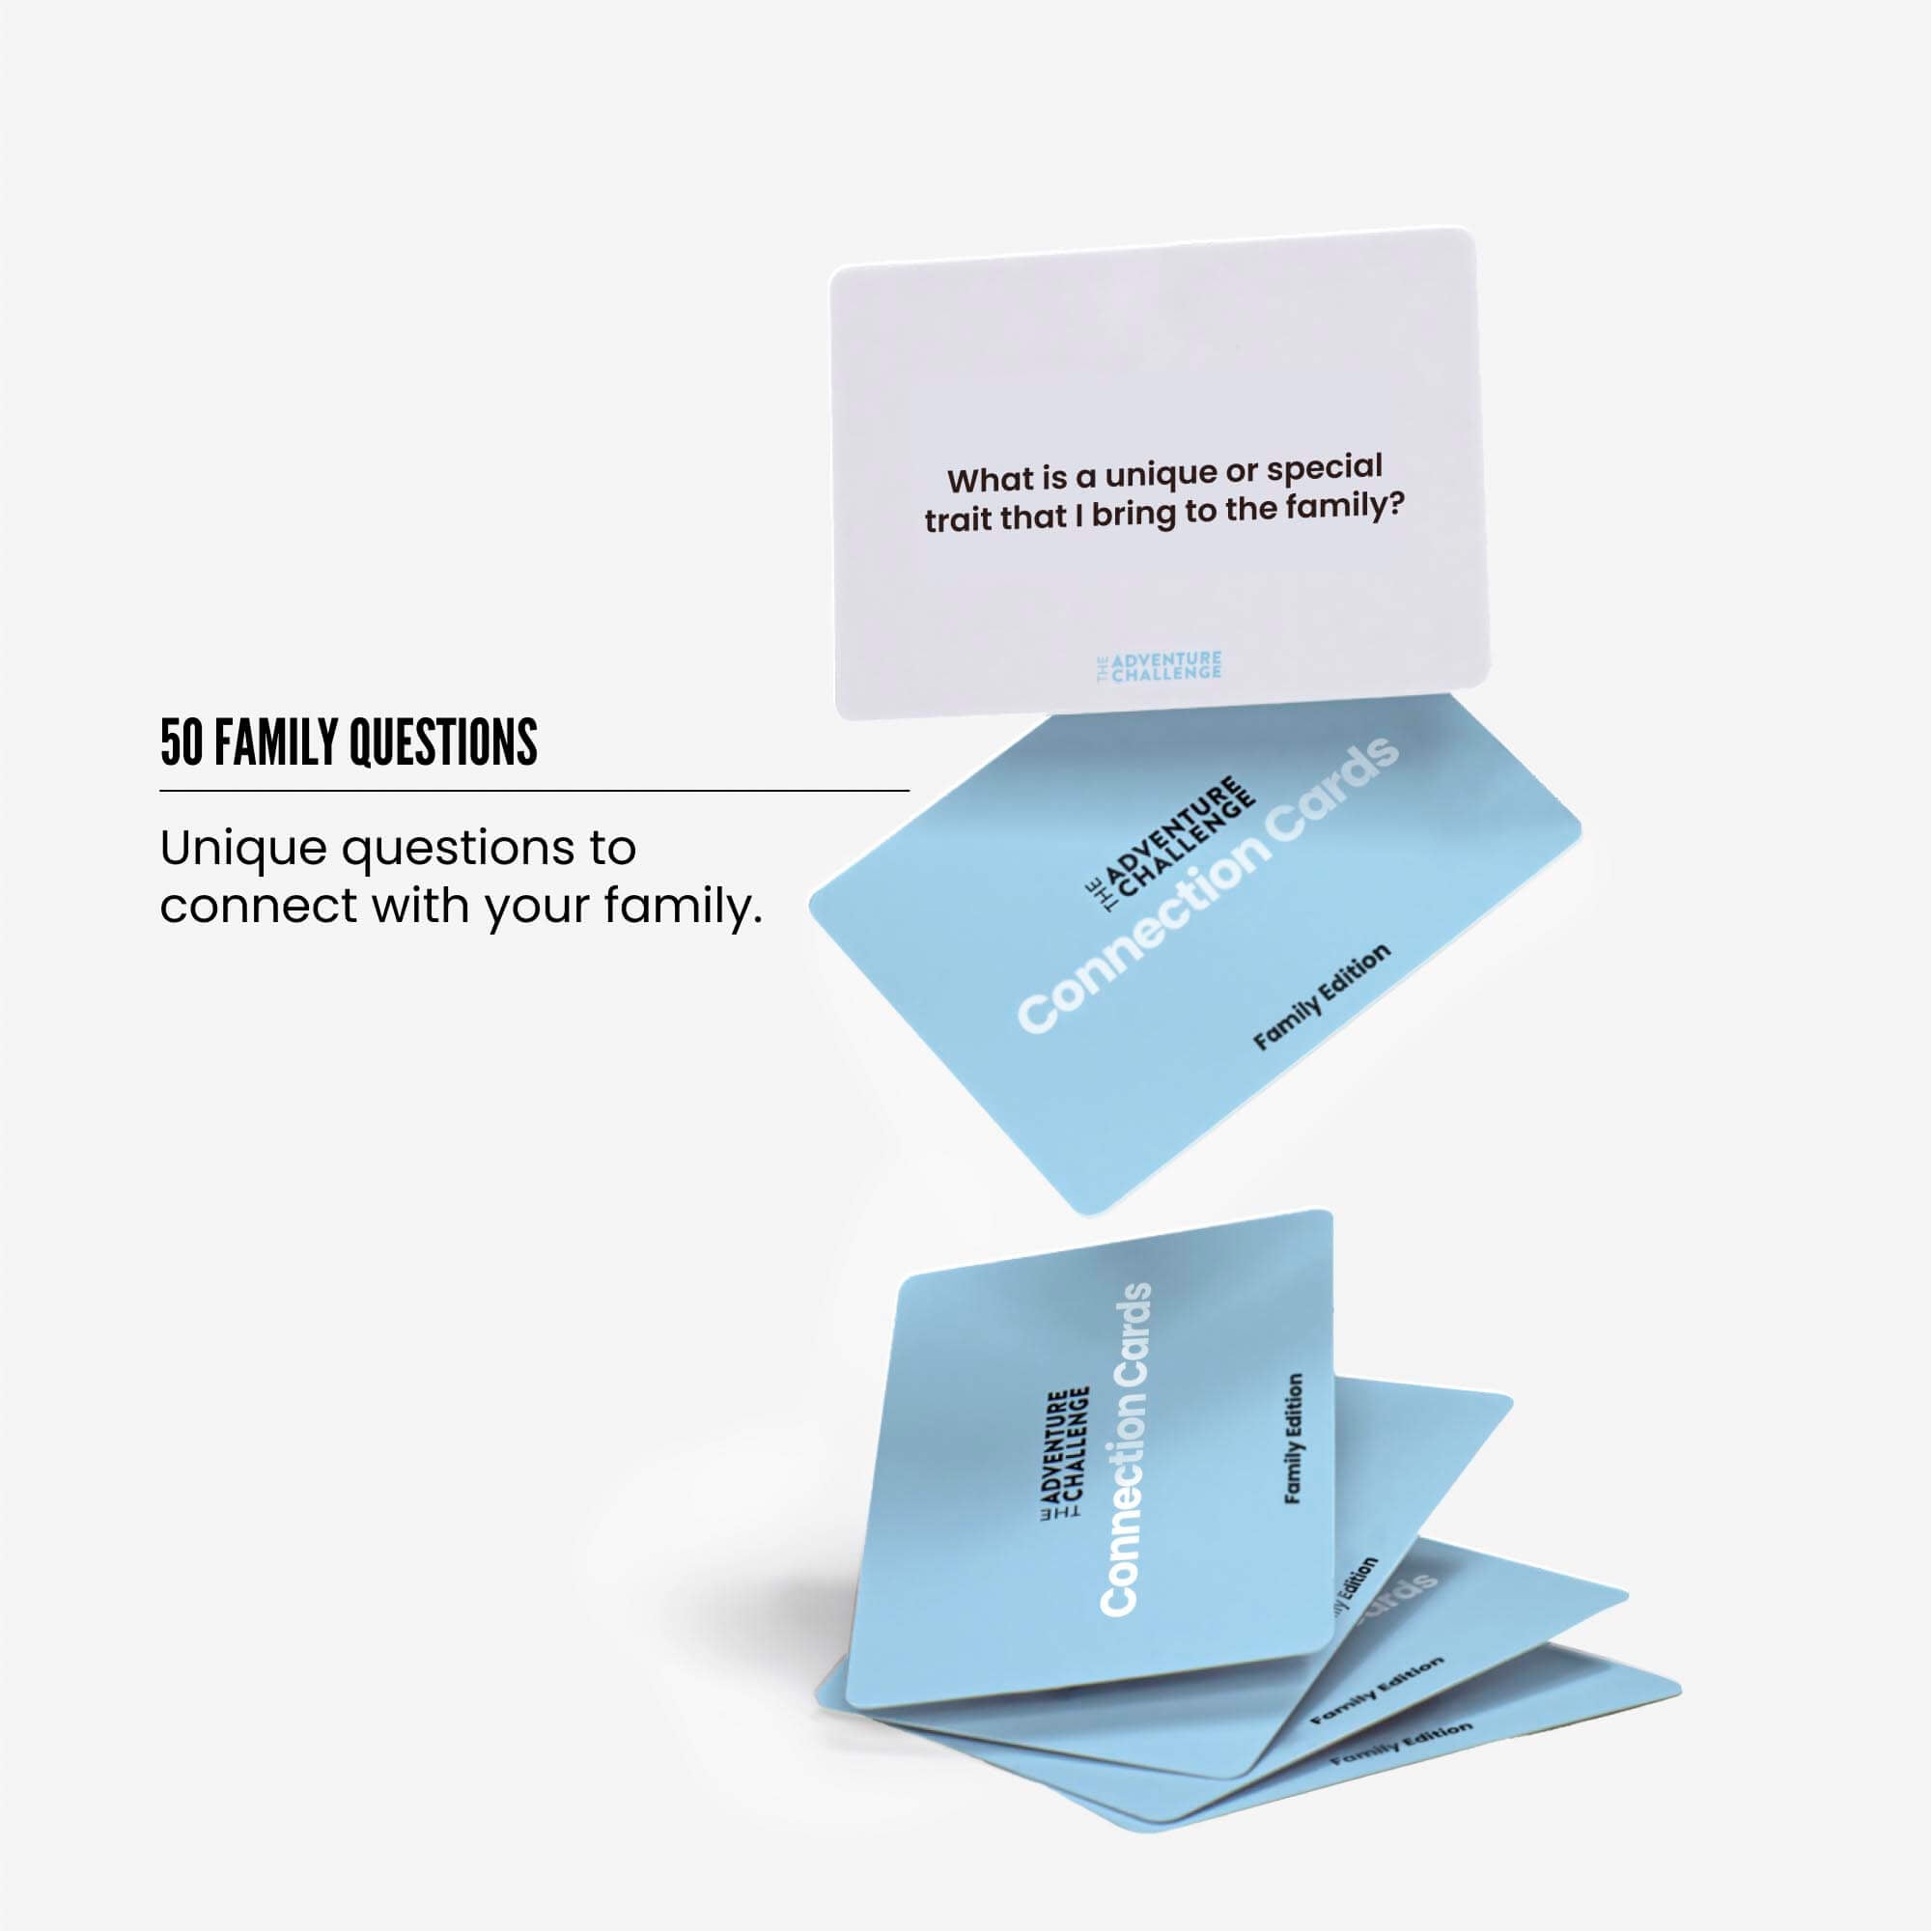 Family Edition and Connection Cards | Family Edition Bundle